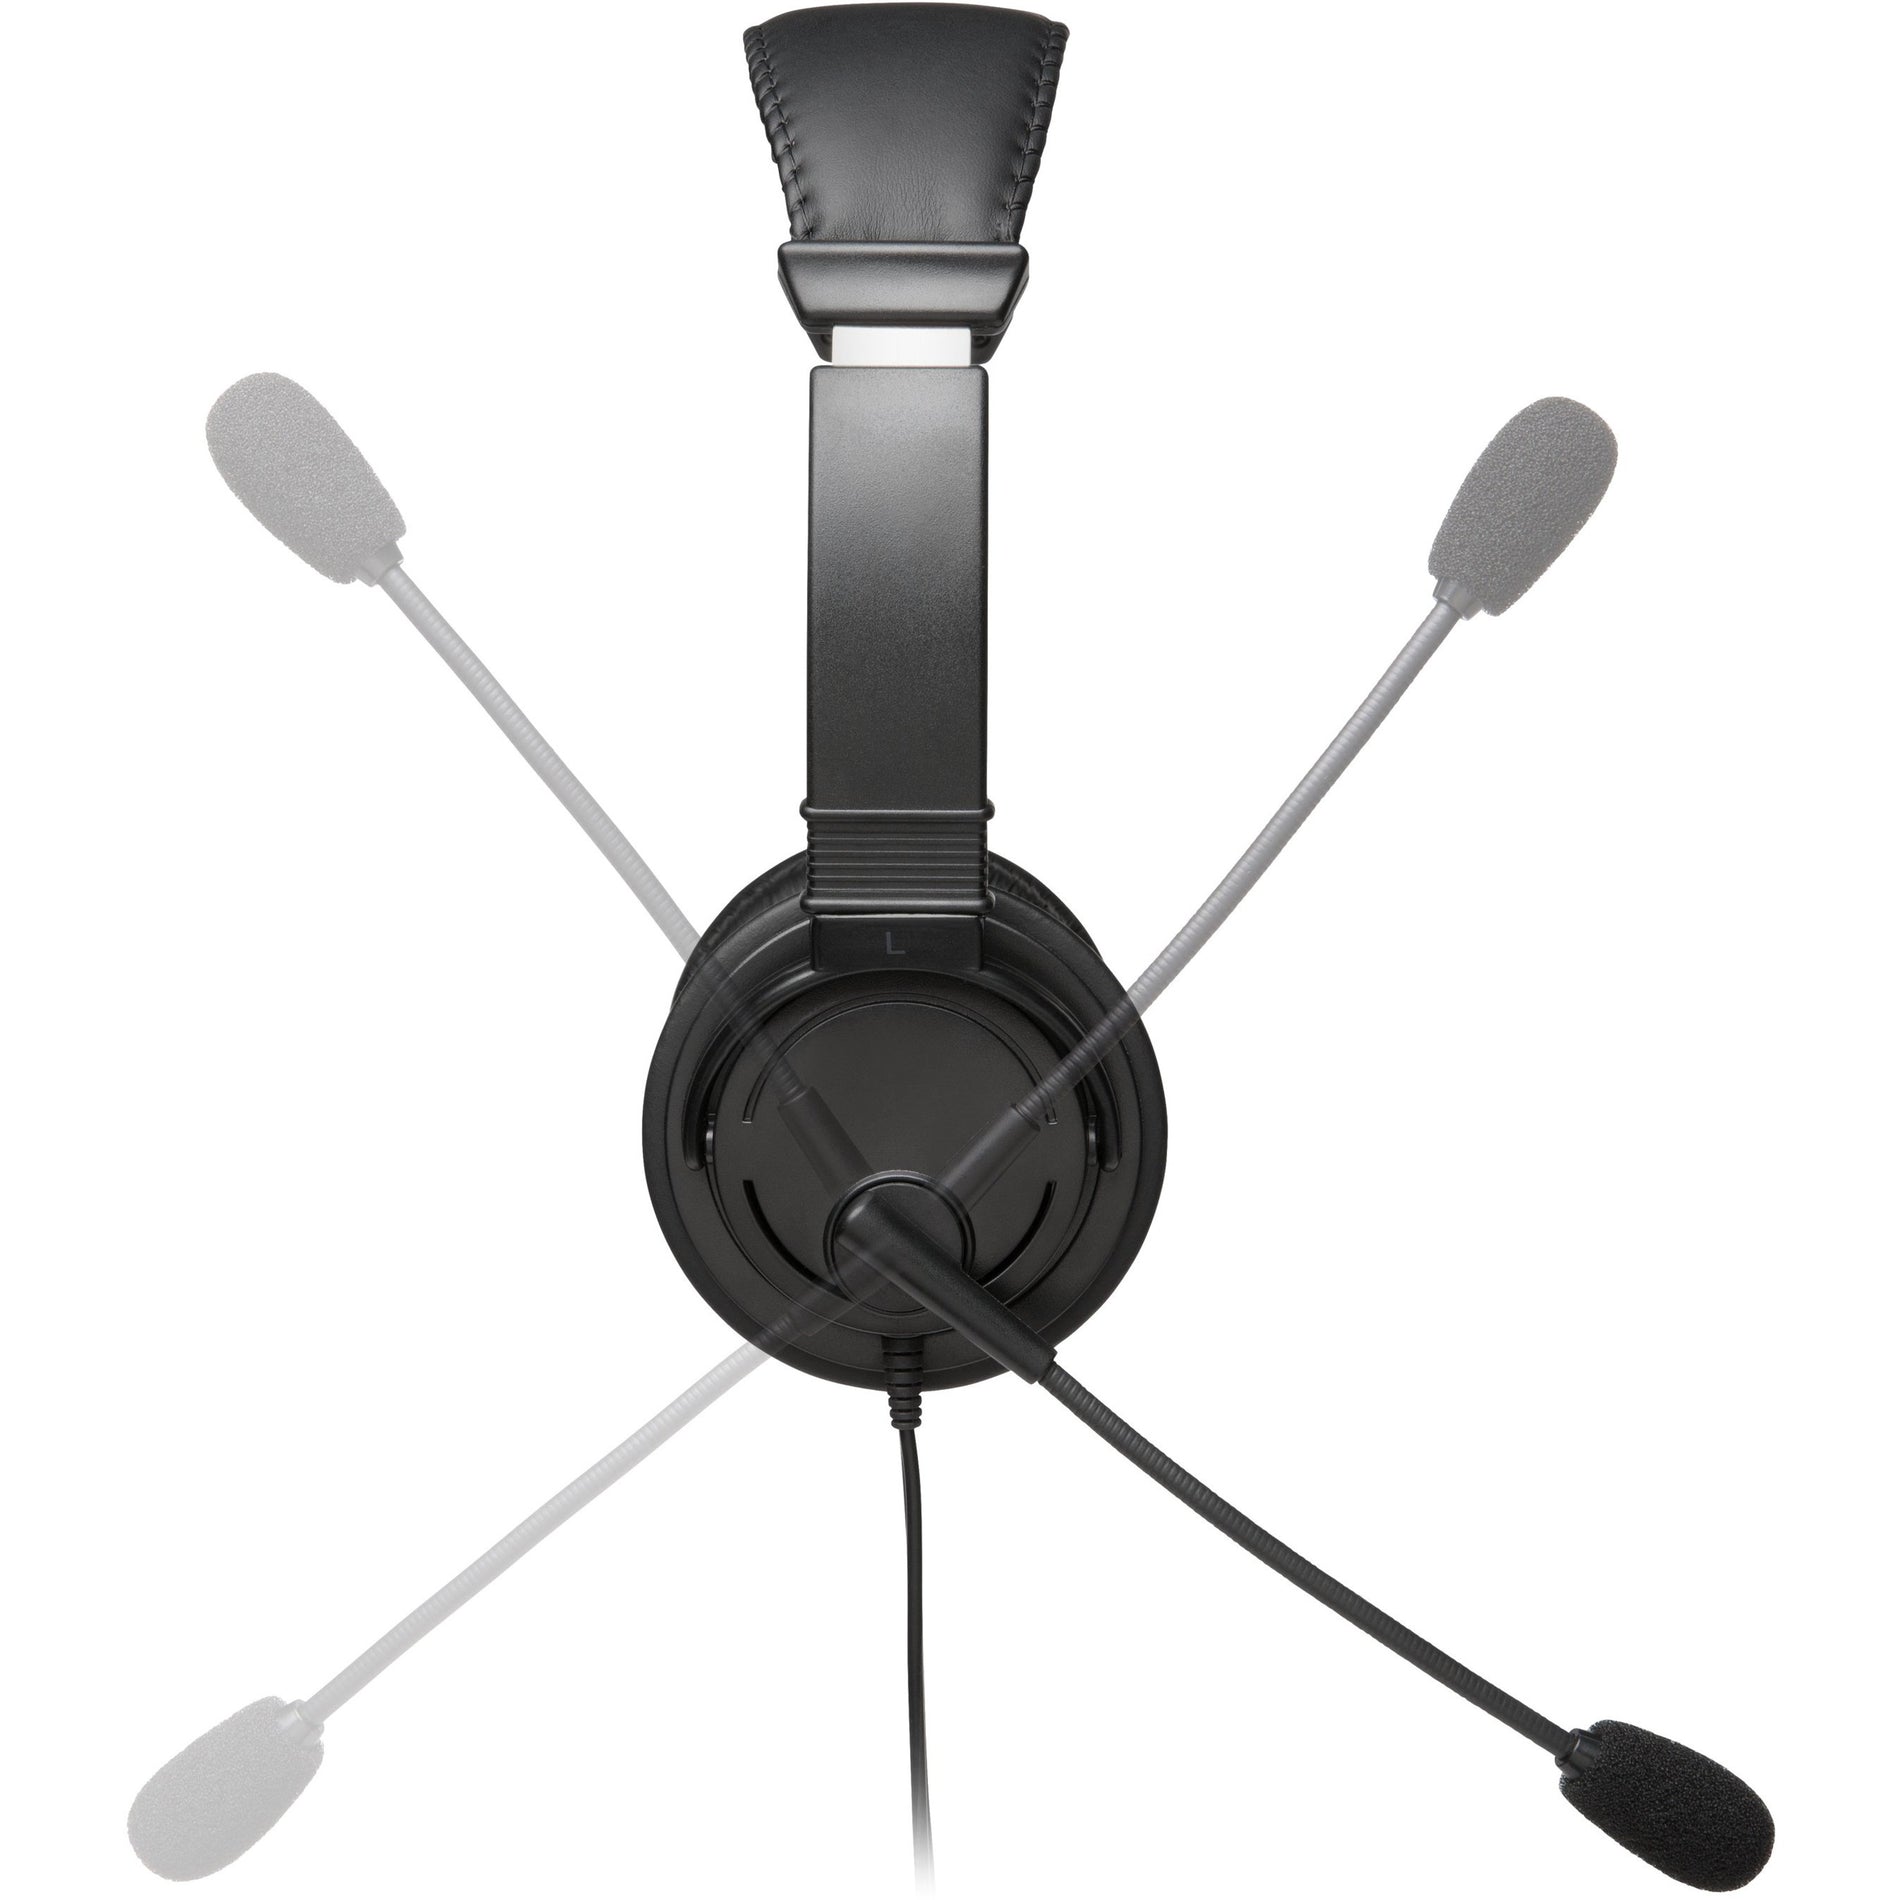 Kensington K97601WW Classic USB-A Headset with Mic, Comfortable, Noise Cancelling, 6 ft Cable